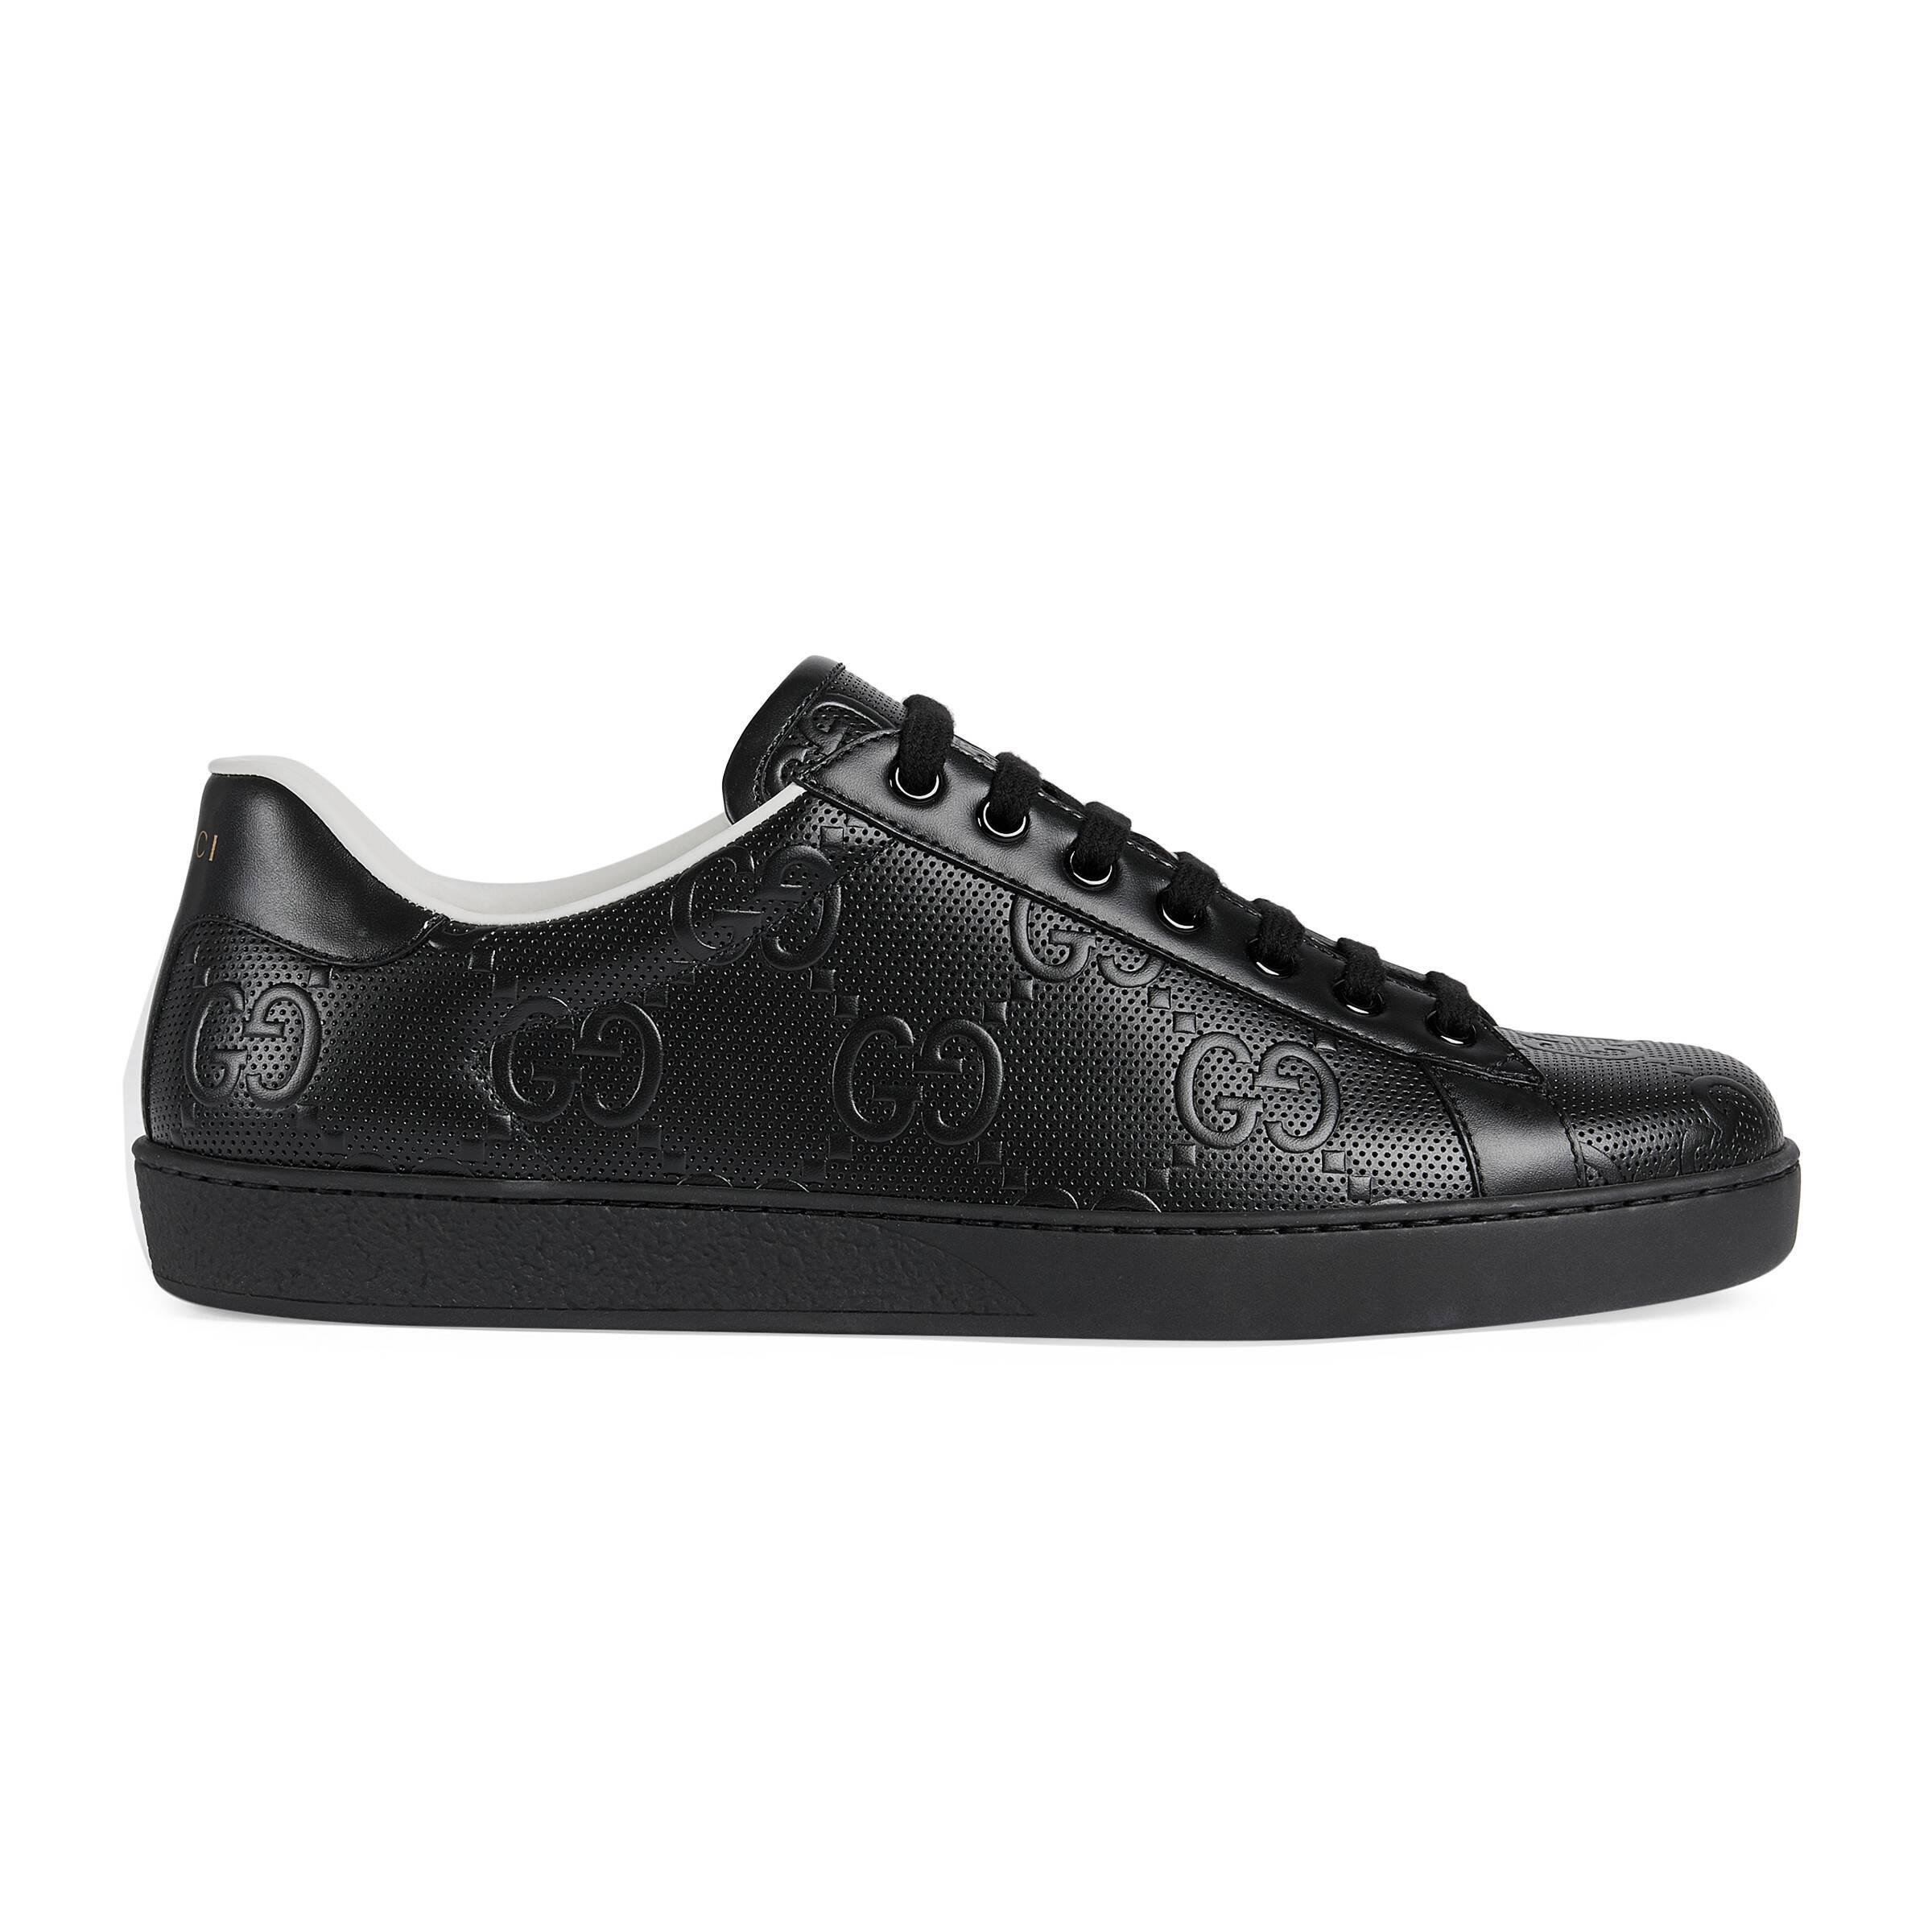 Gucci Ace GG Embossed Sneaker in Black for Men - Lyst